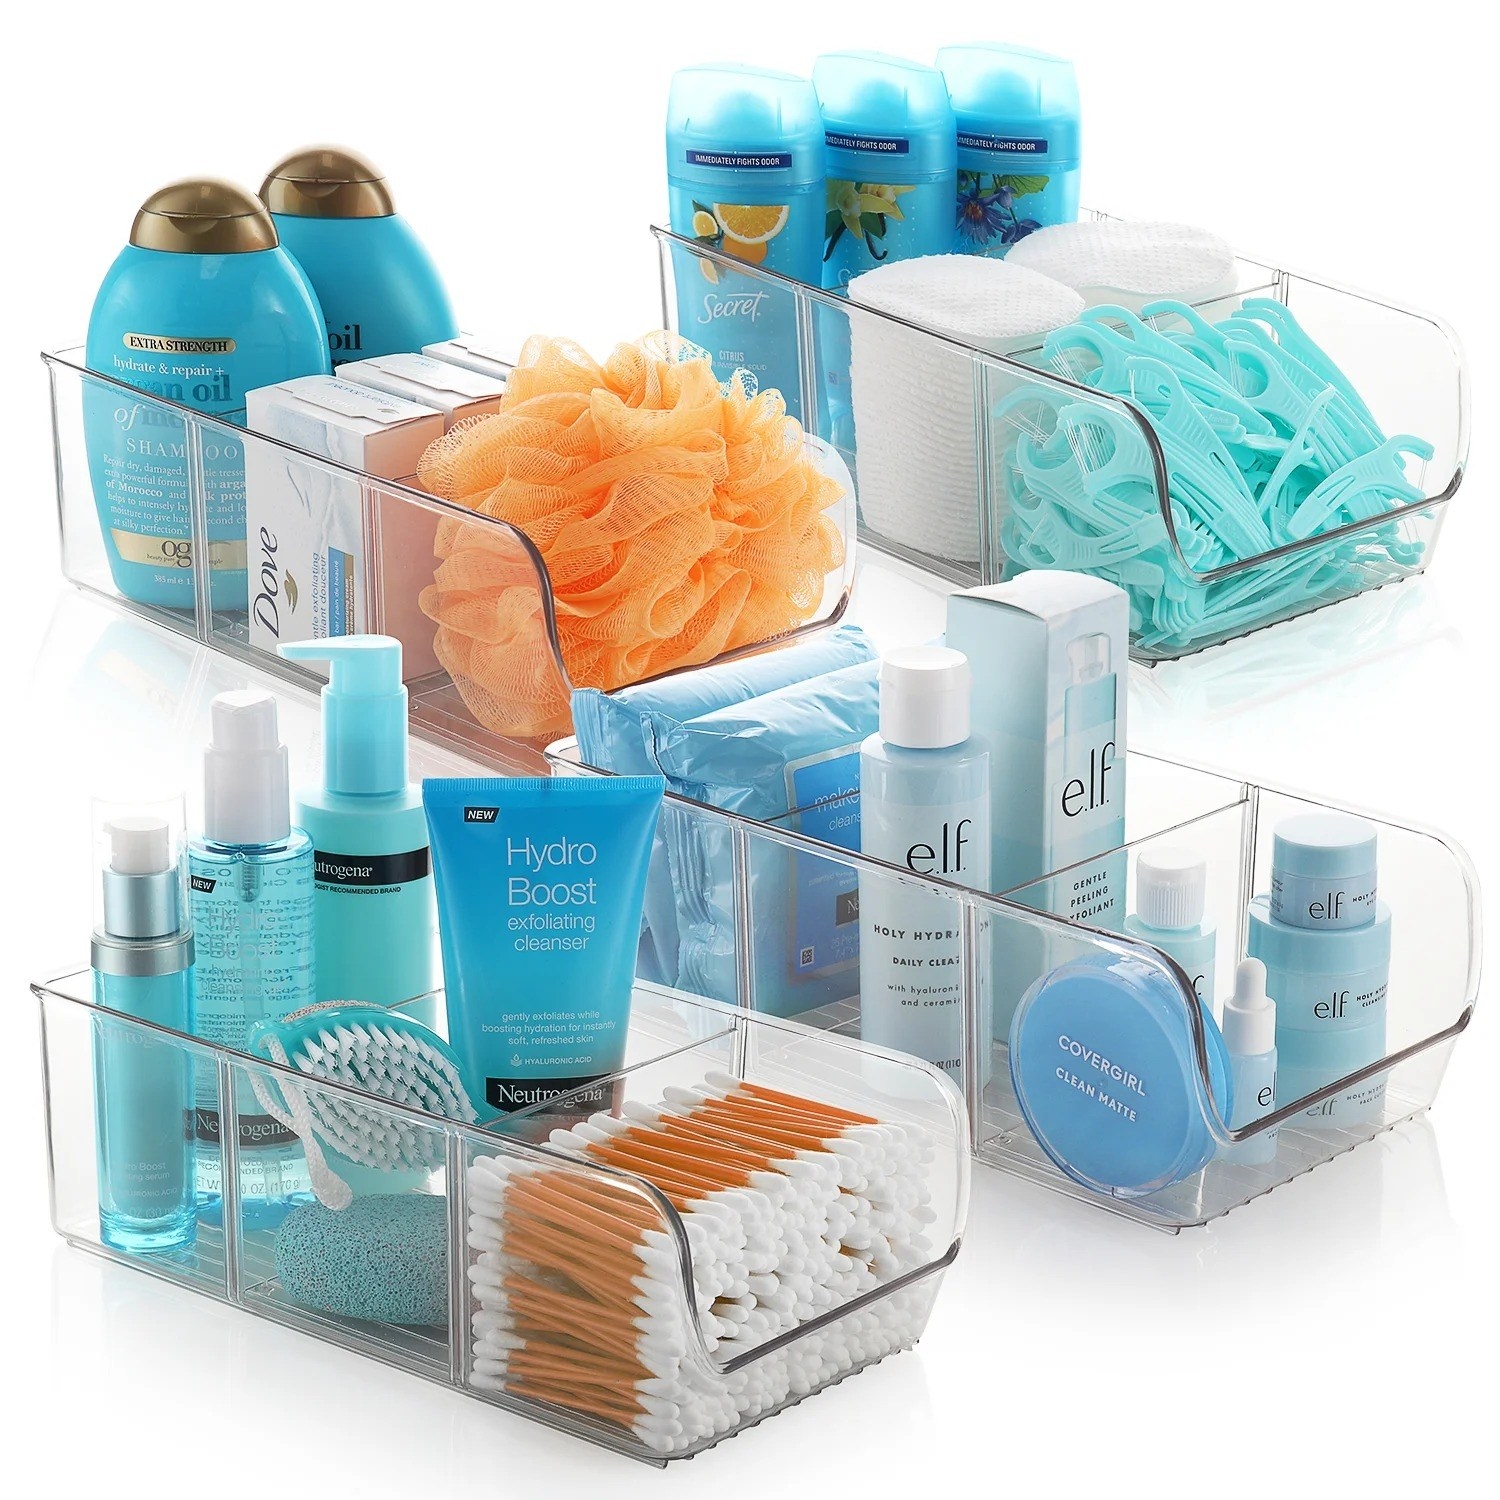 The four clear storage containers with dividers holding deodorant, shampoo, and more